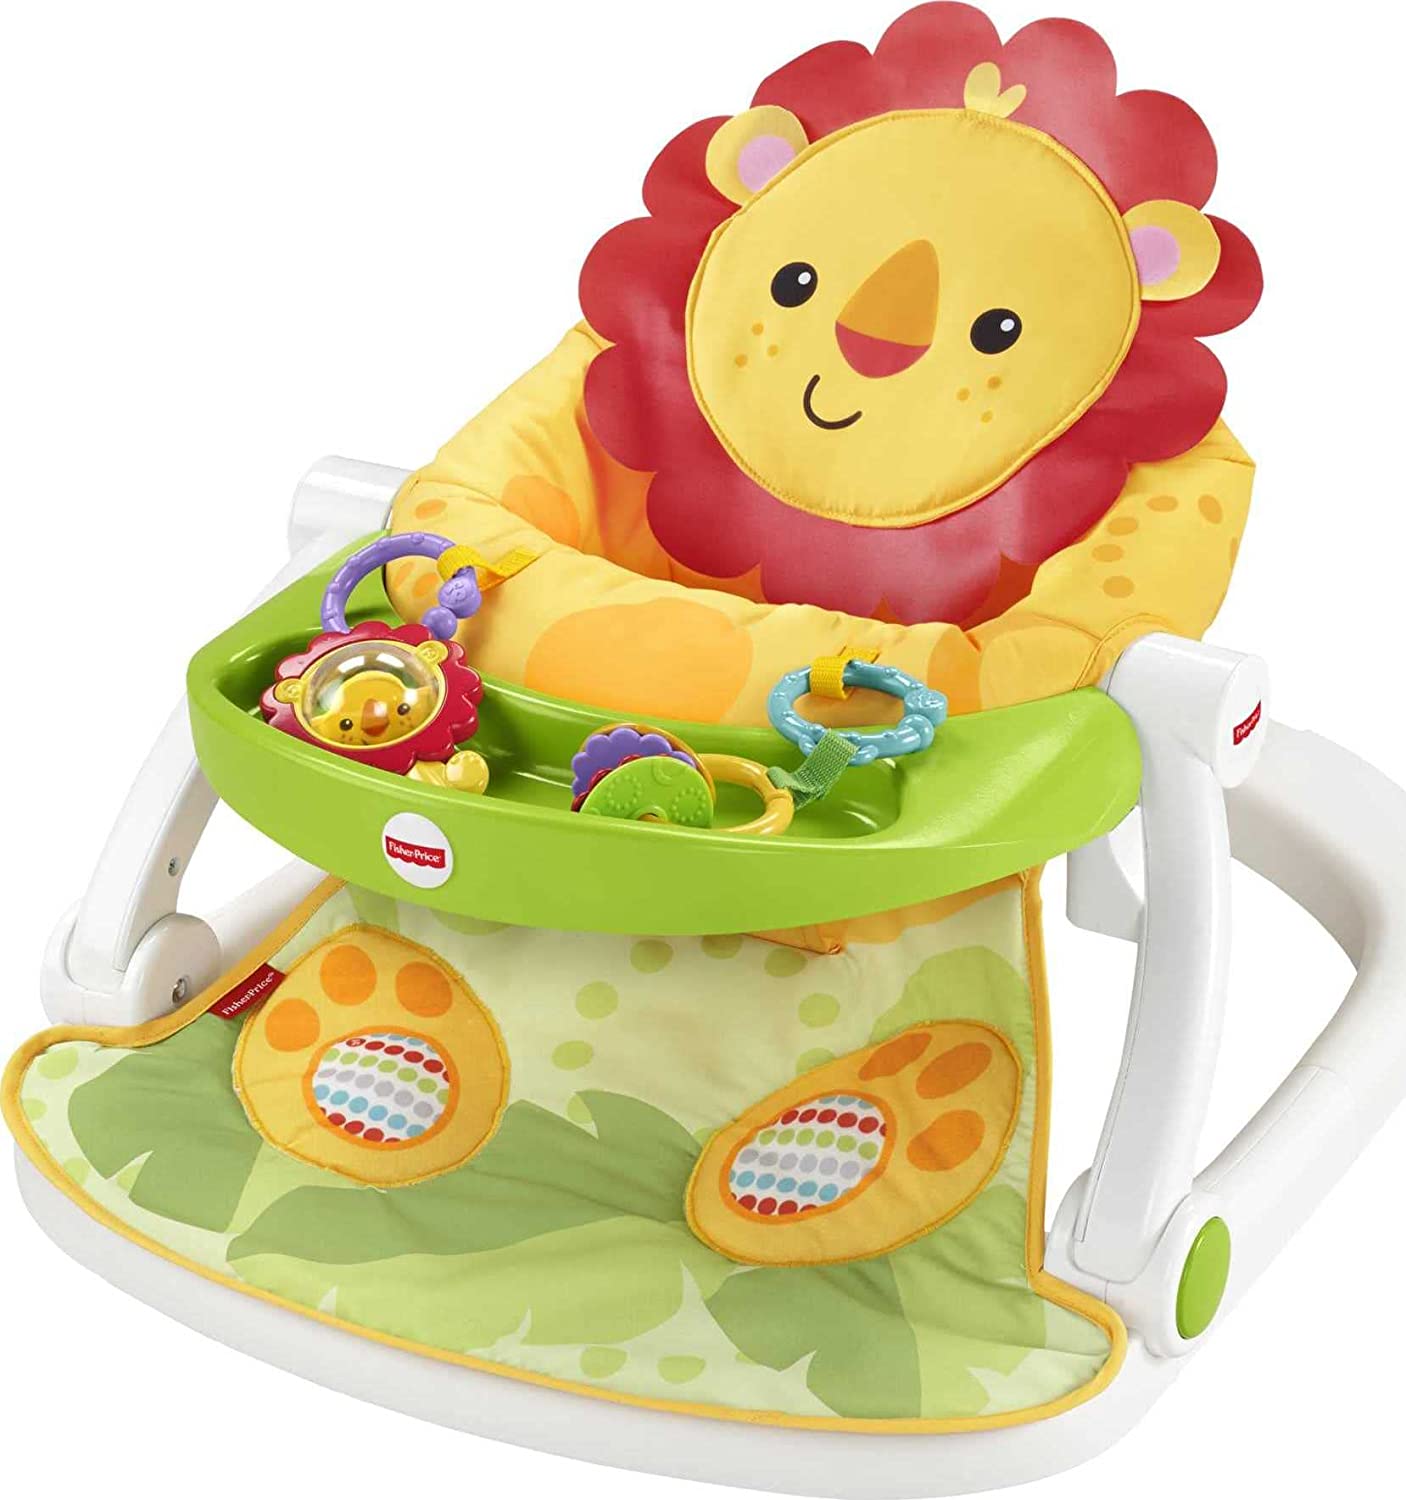 Fisher-Price Sit-Me-Up Floor Seat, Lion - with Toy Tray, Portable Infant Chair